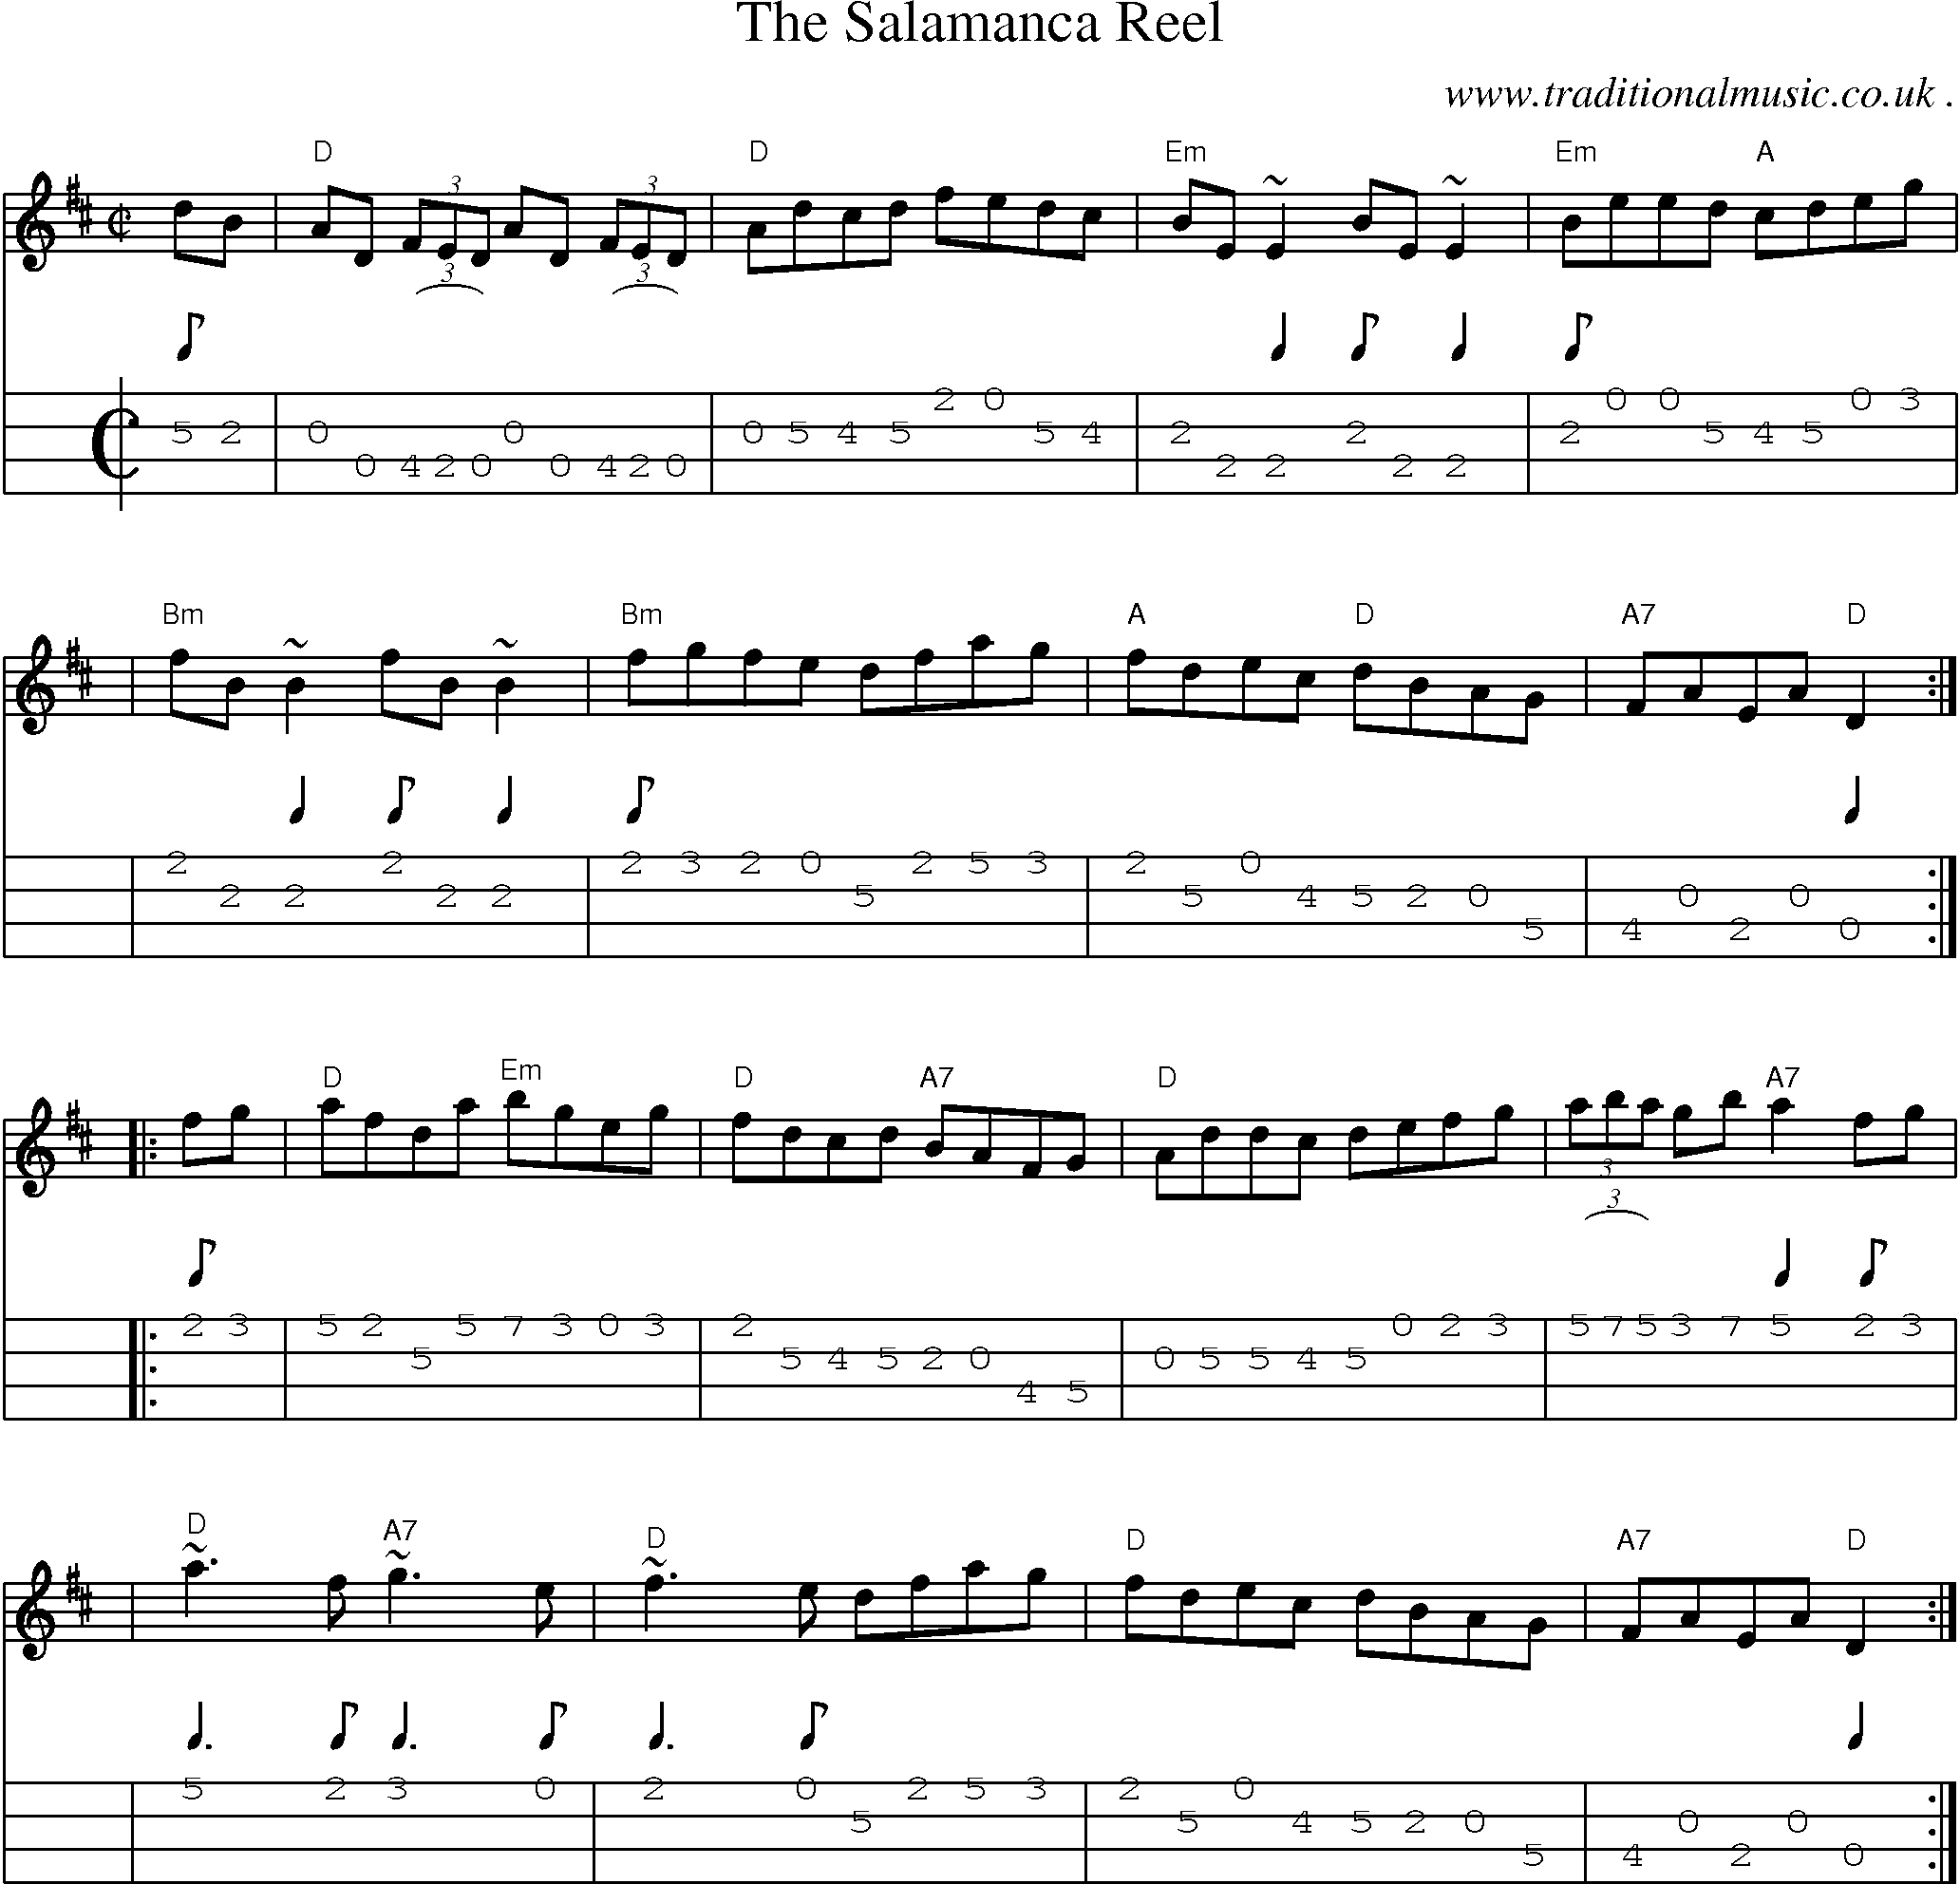 Sheet-music  score, Chords and Mandolin Tabs for The Salamanca Reel